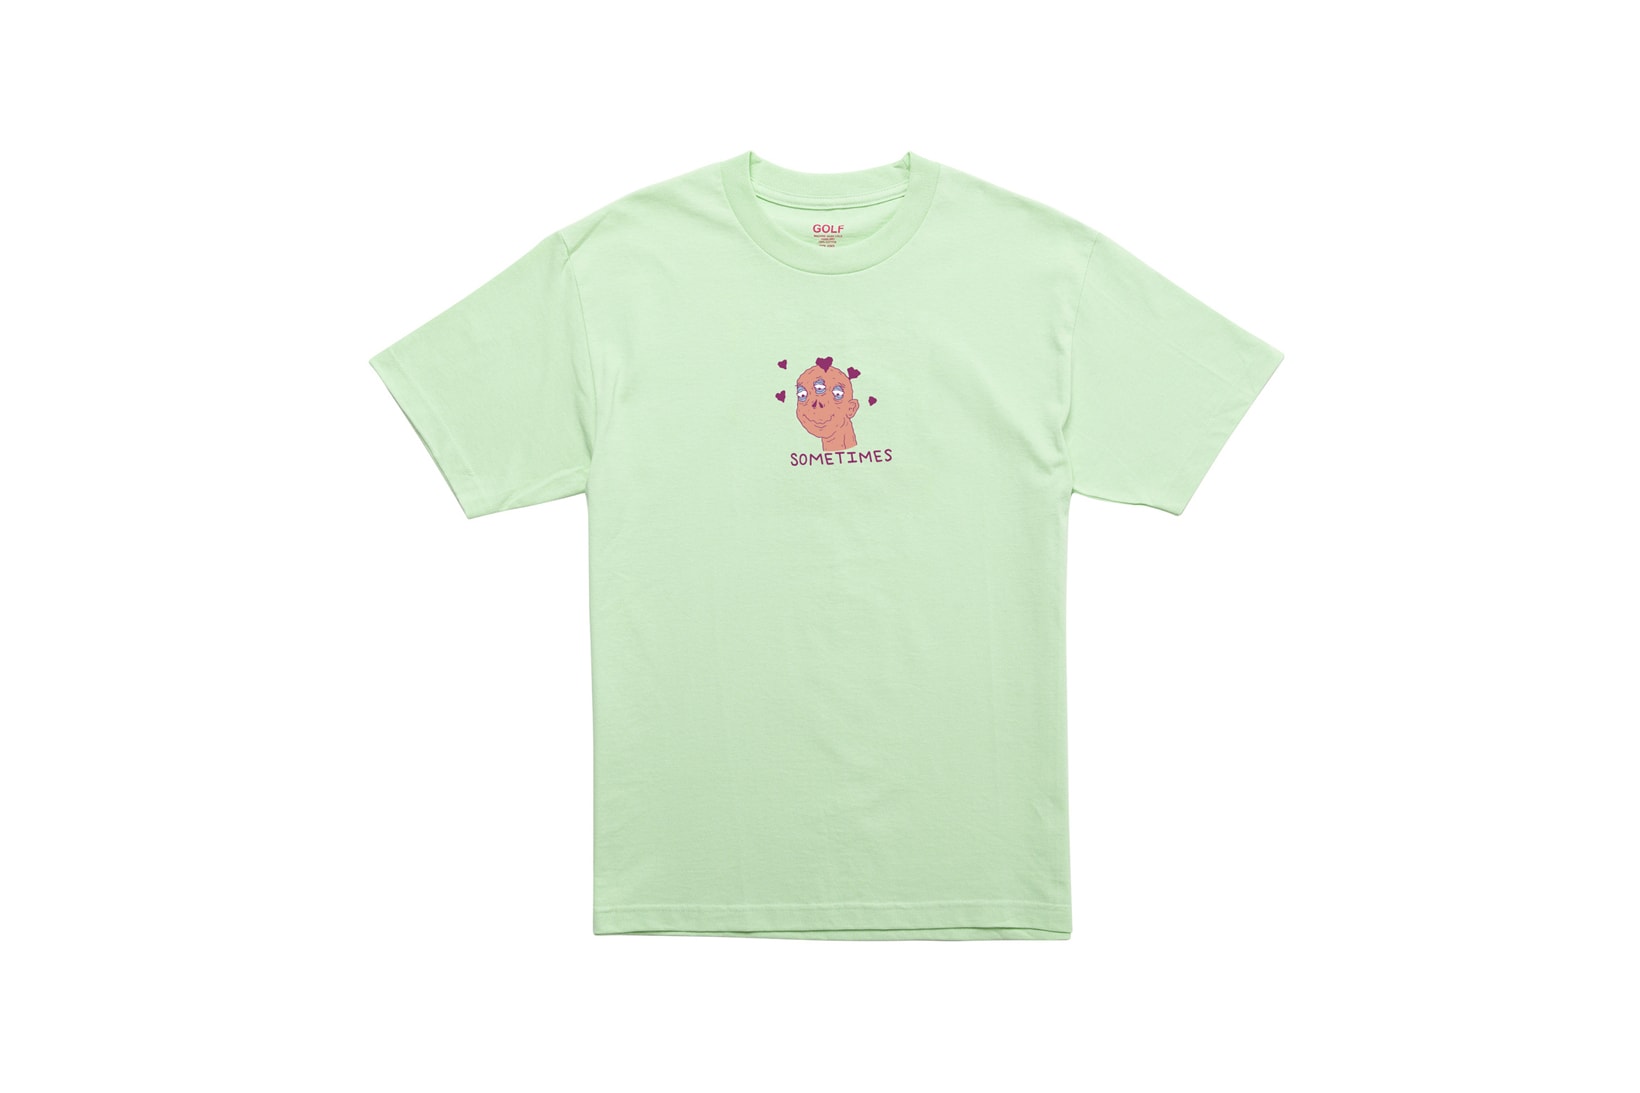 Golf Wang Tyler The Creator Fairfax Graphic Tee Find Some Time